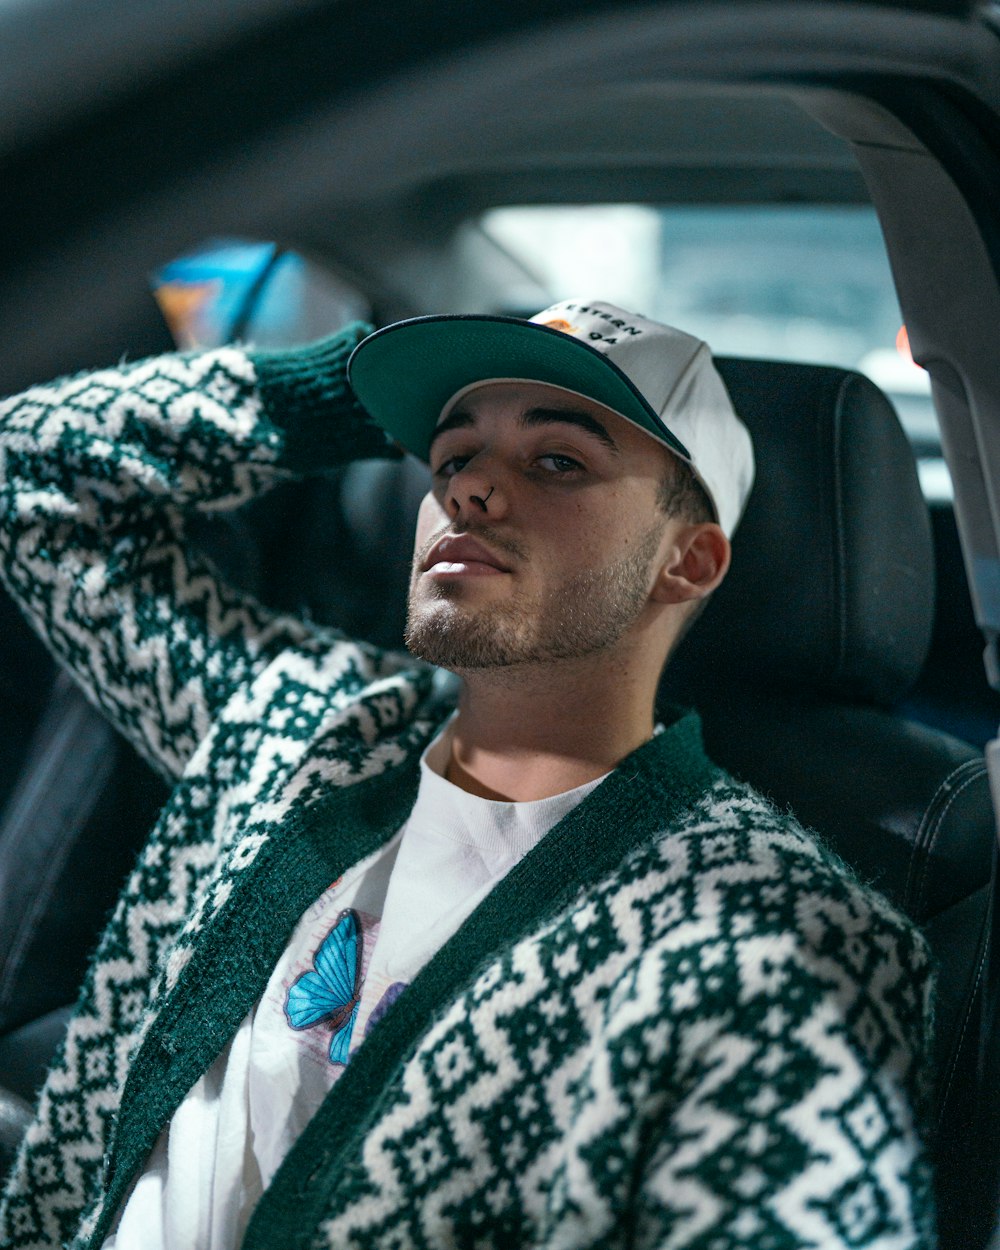 a man sitting in a car wearing a green and white sweater